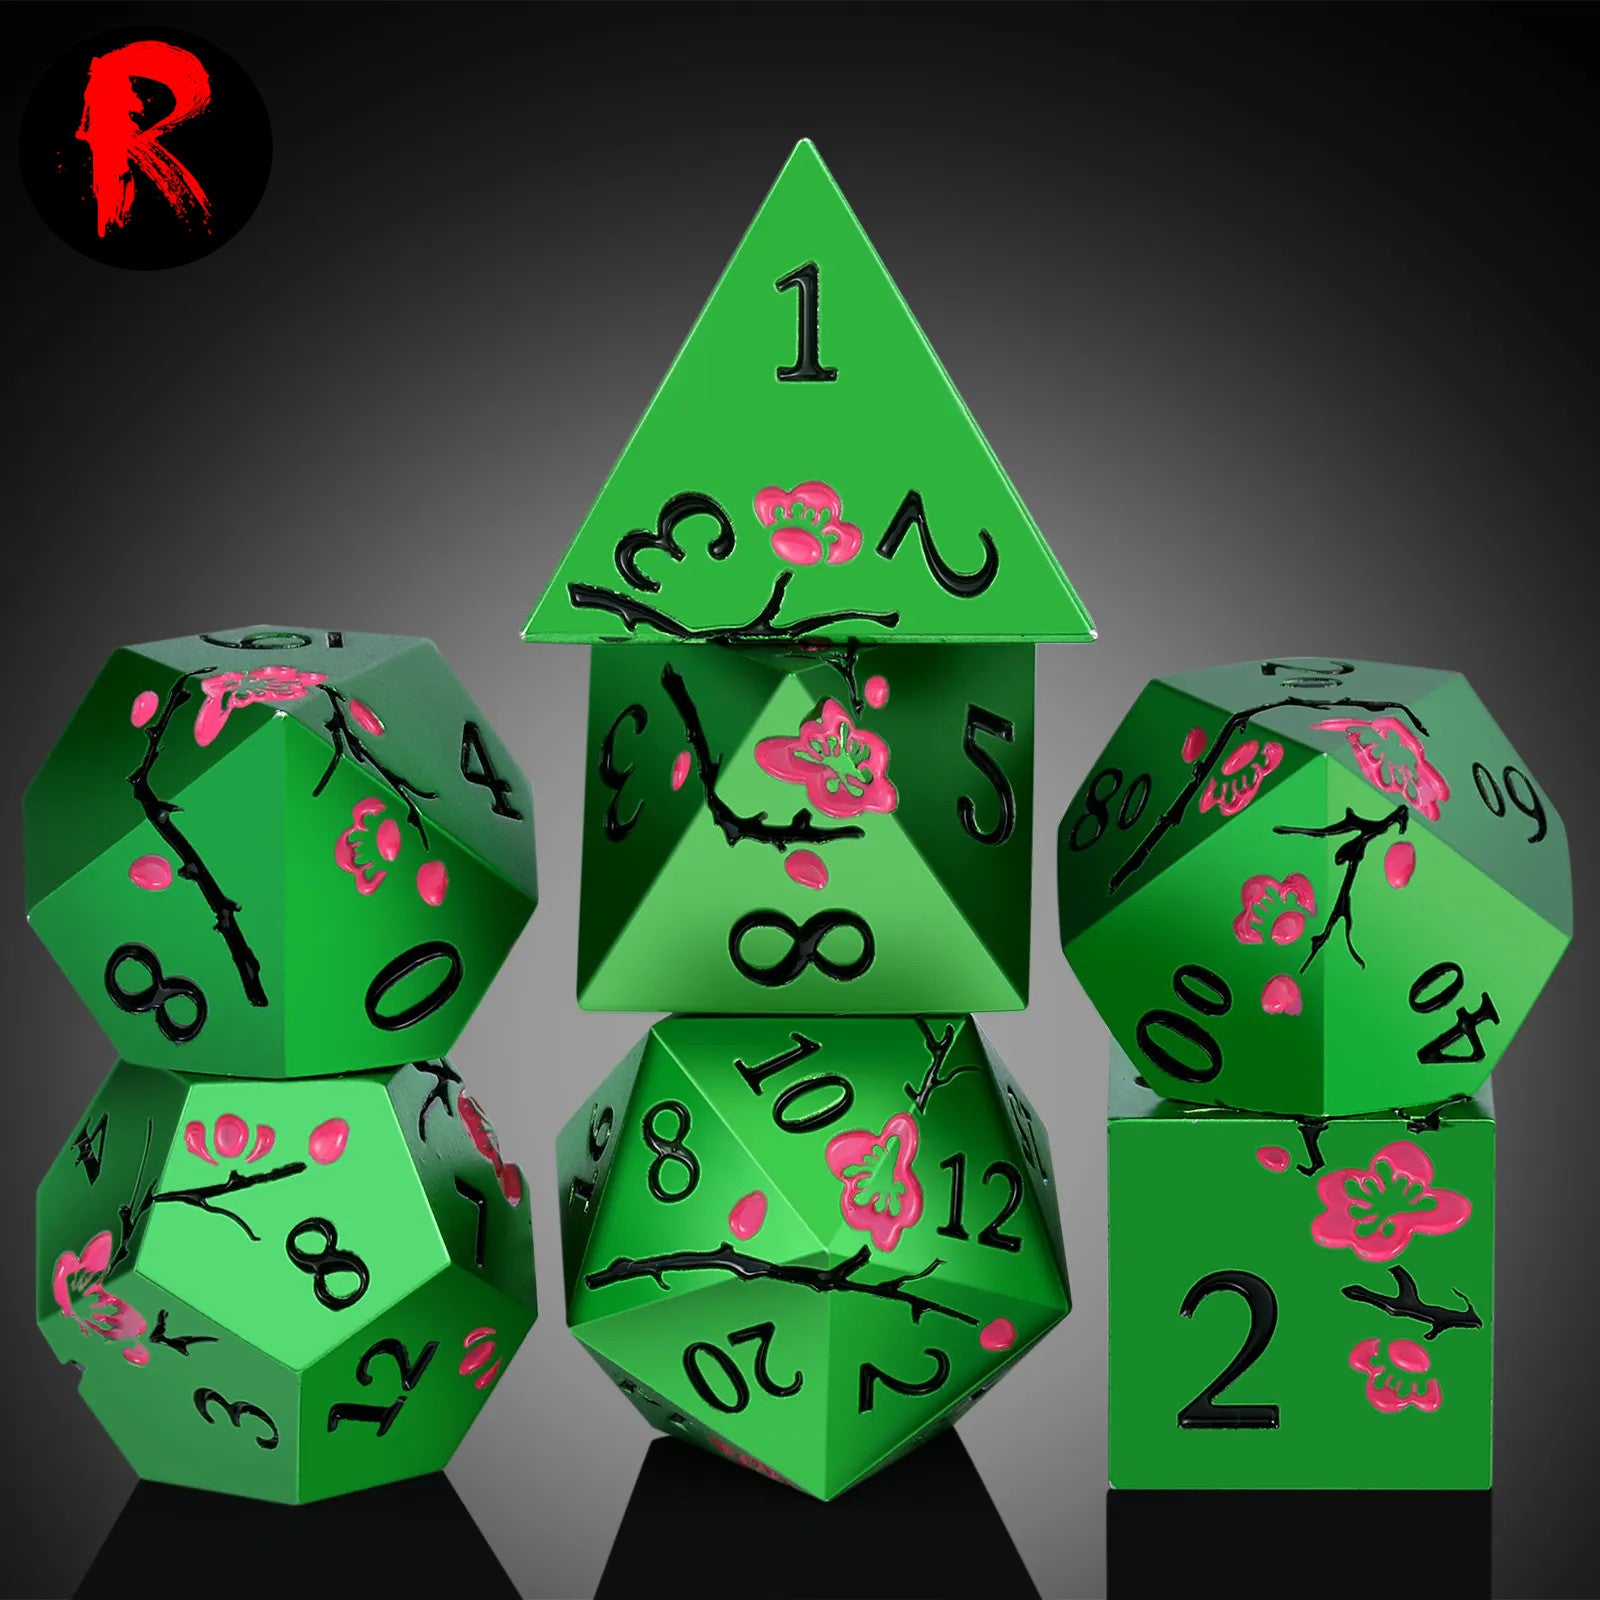 Metal Japanese Cherry Blossom Rose Green and Pink 7-Die RPG Set - Ronin Games Dice MP010